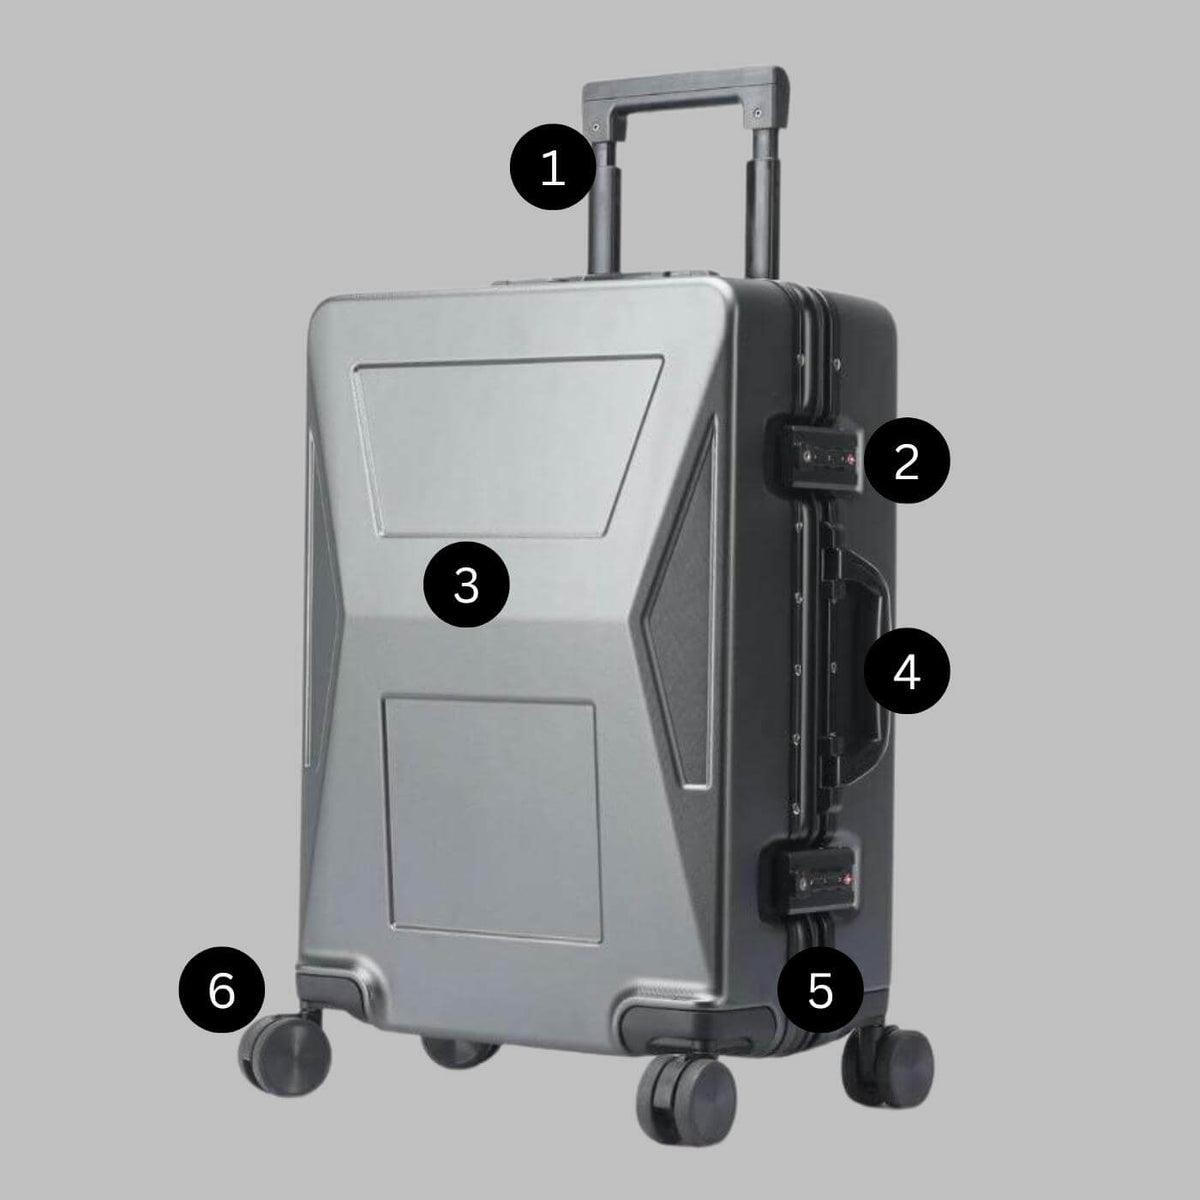 Carryon luggage with cybertruck style design - perfect for traveling with technology"